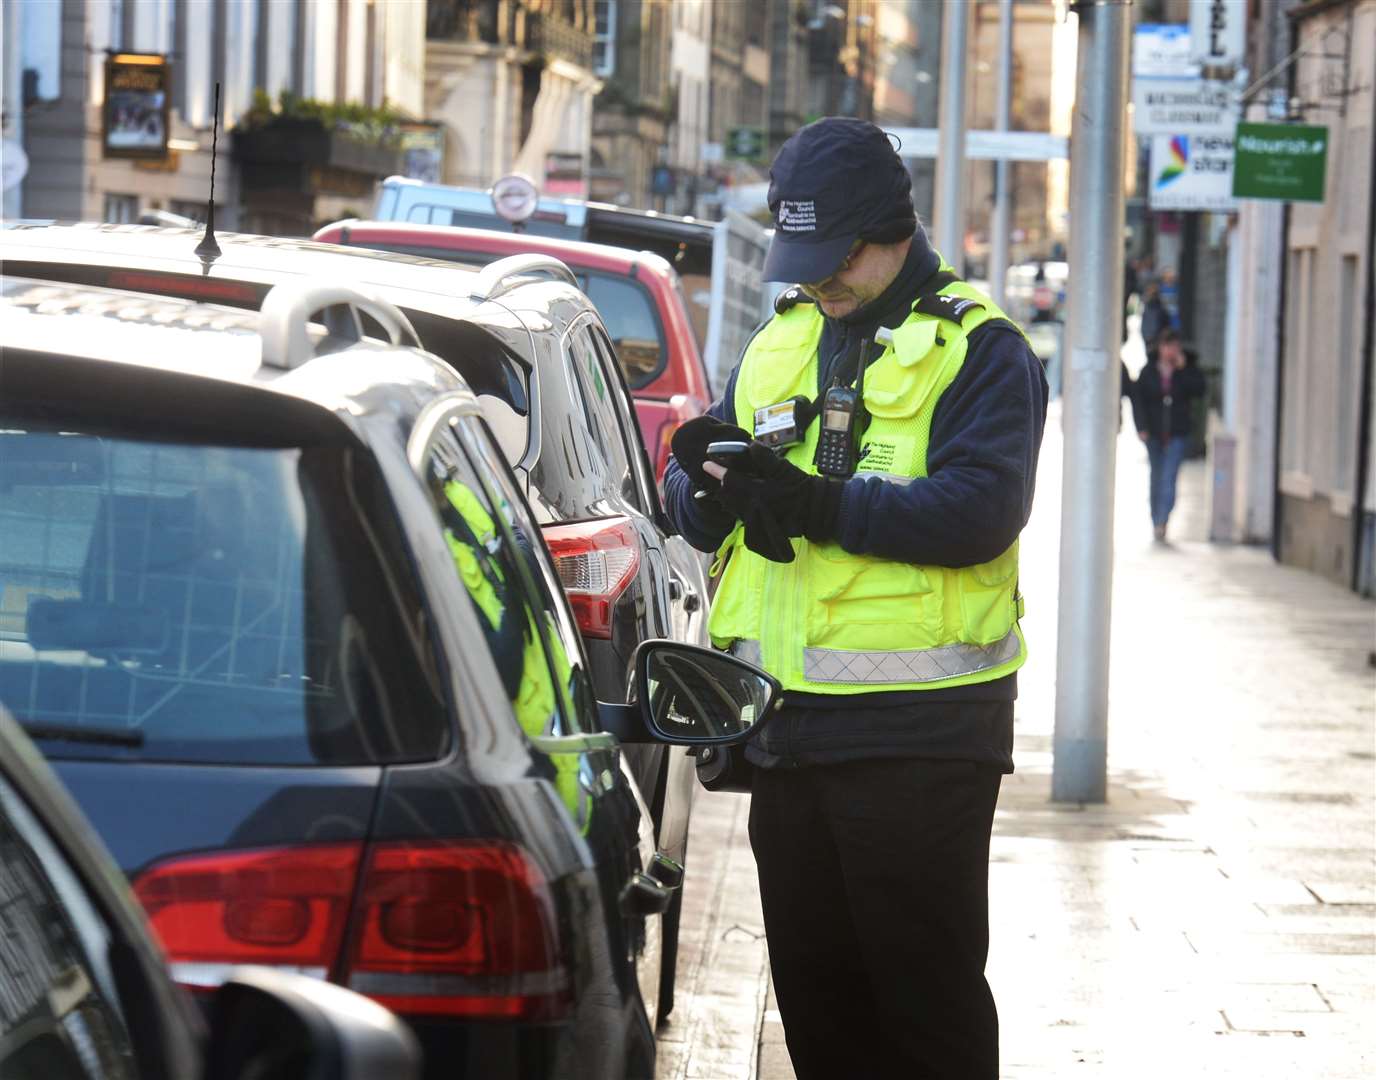 More than a thousand tickets were issued to drivers parked in Inverness city centre’s Church Street last year.